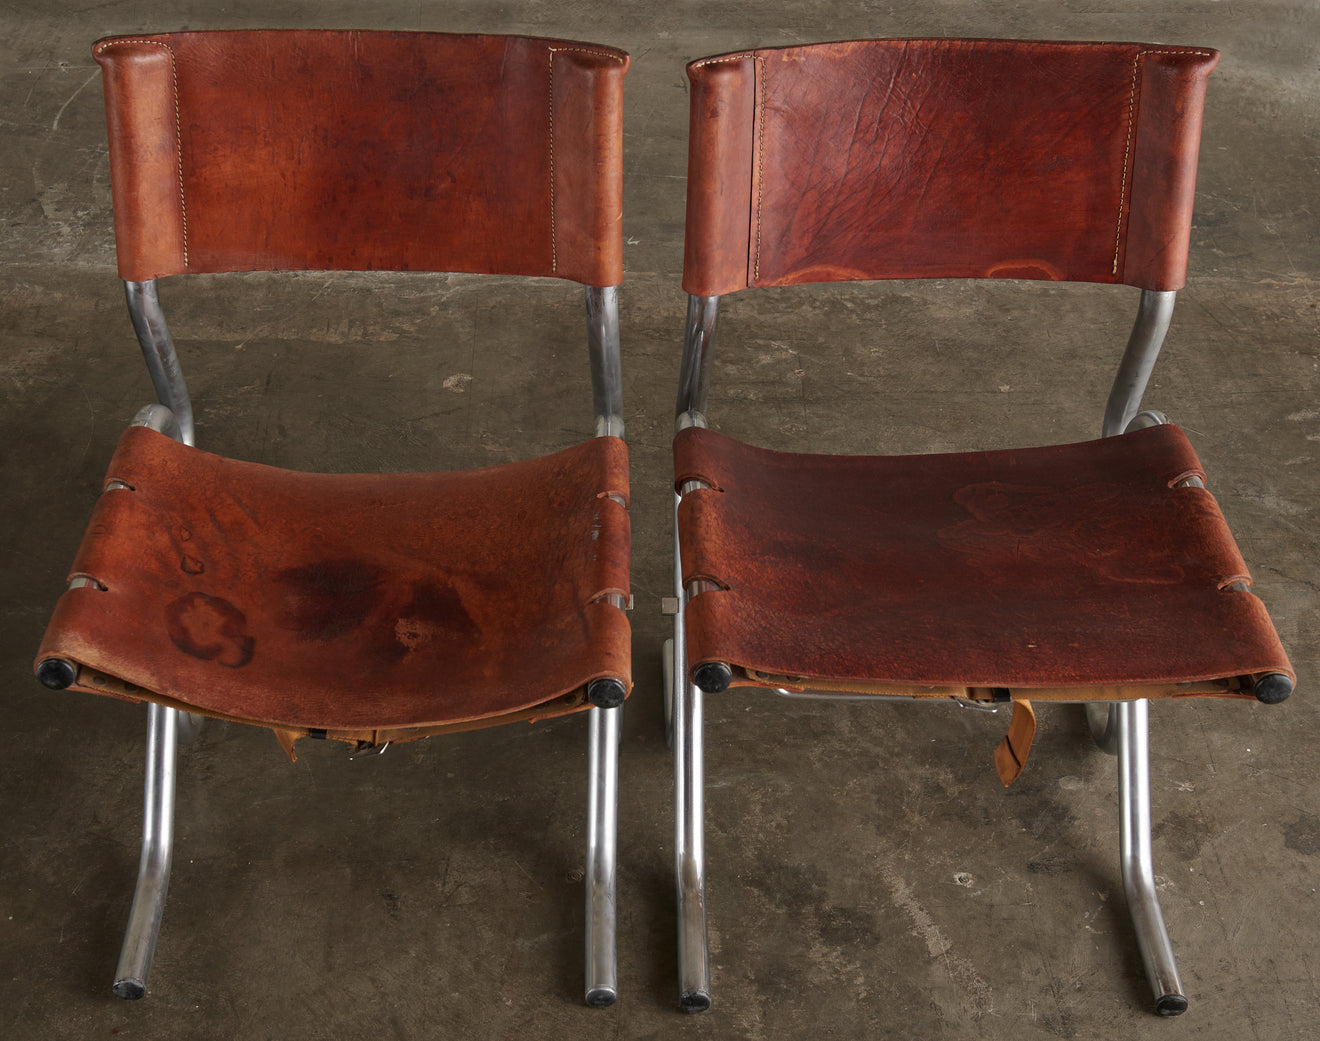 SET OF 4 CHAIRS FROM UNAM